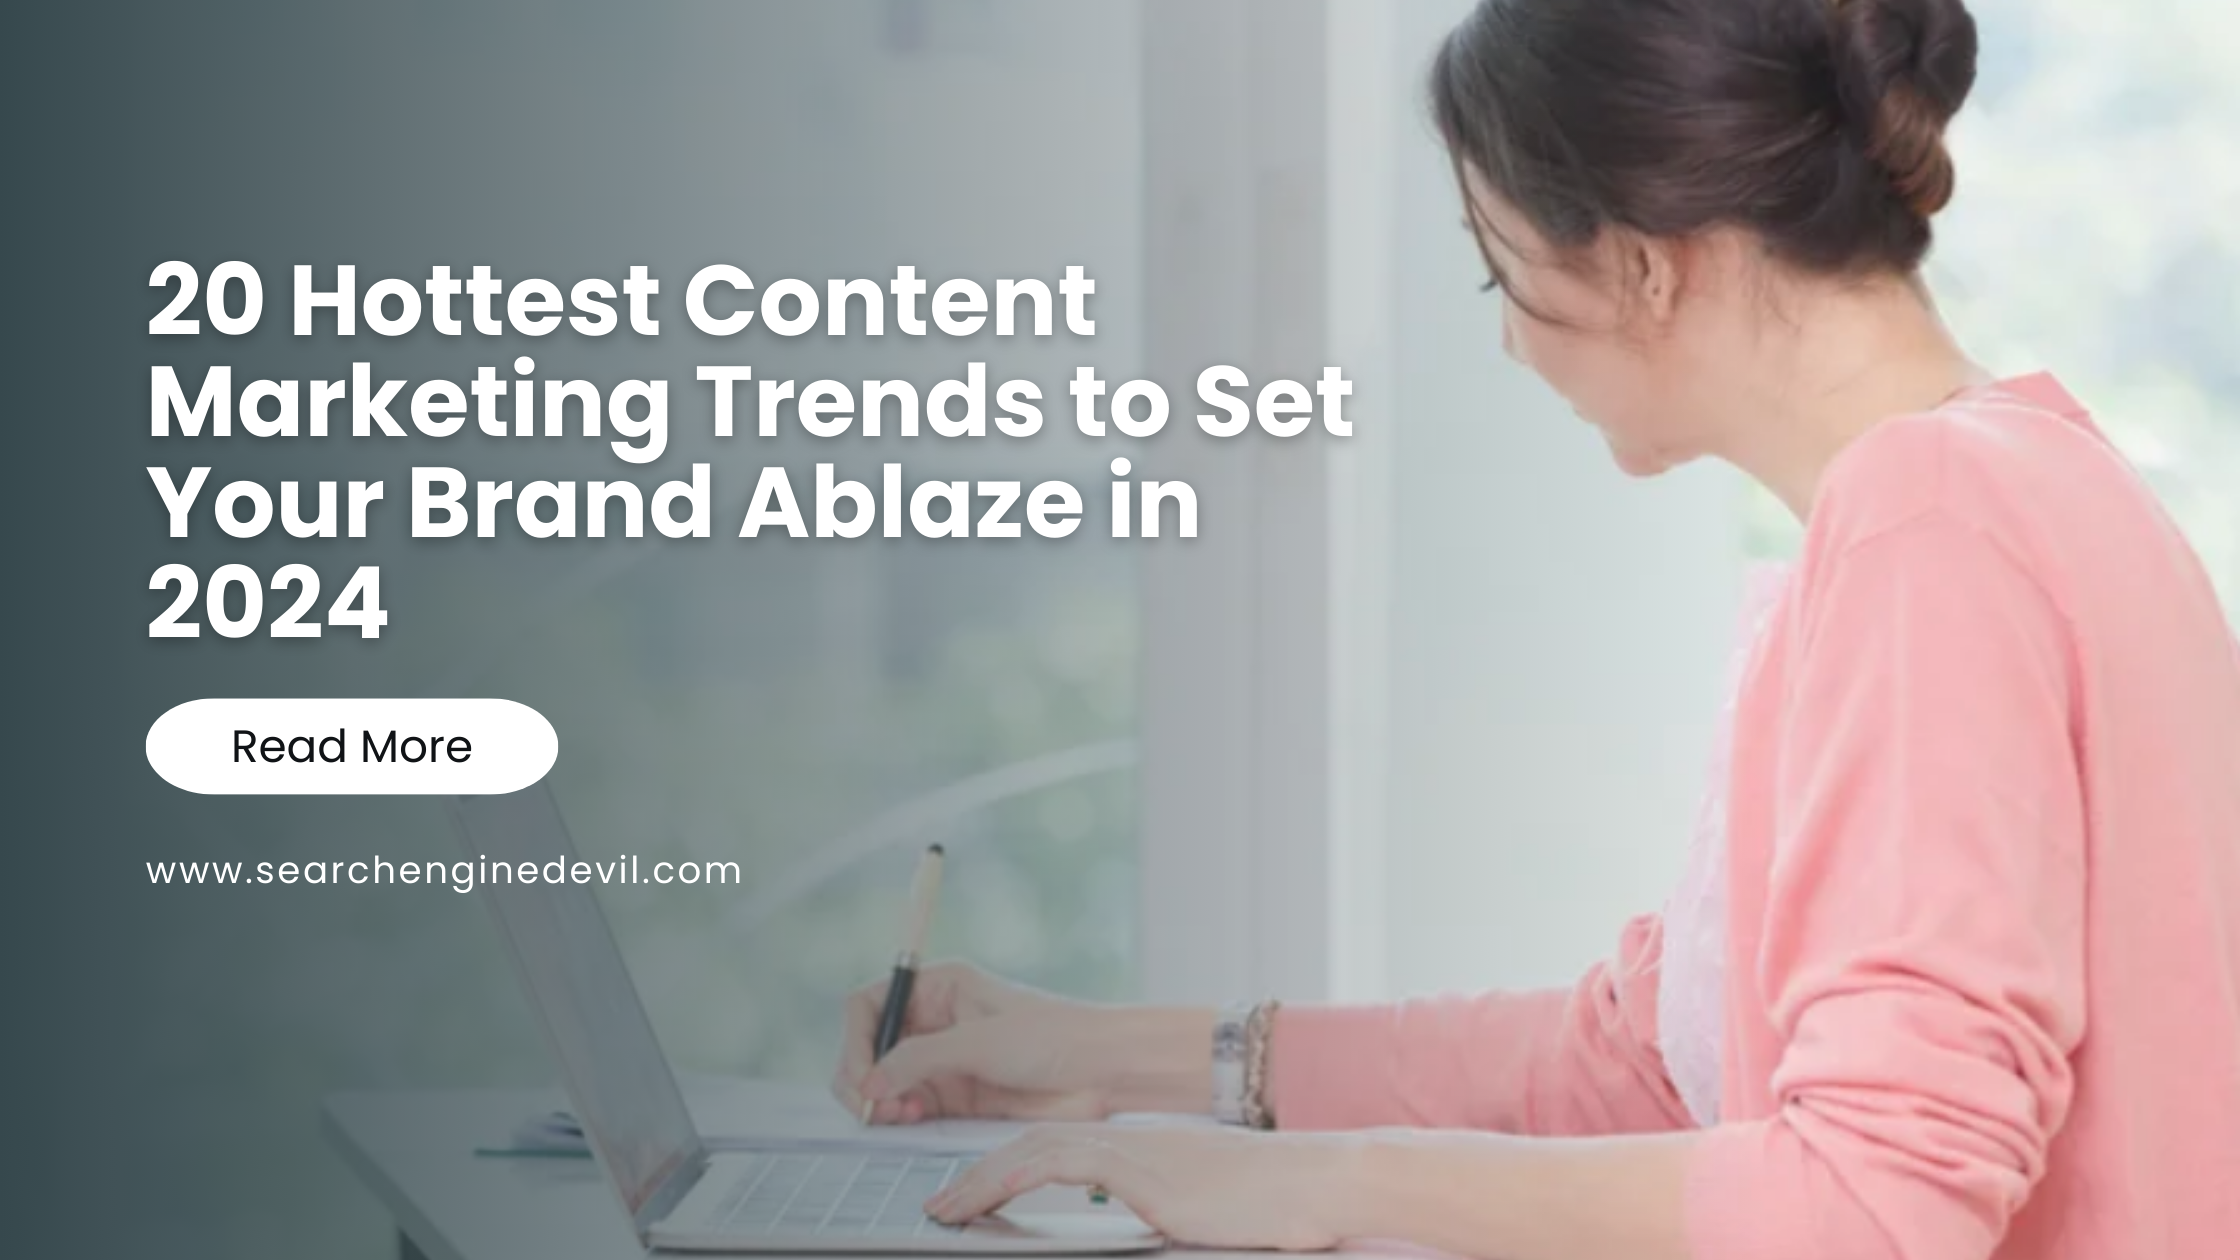 20 Hottest Content Marketing Trends to Set Your Brand Ablaze in 2024